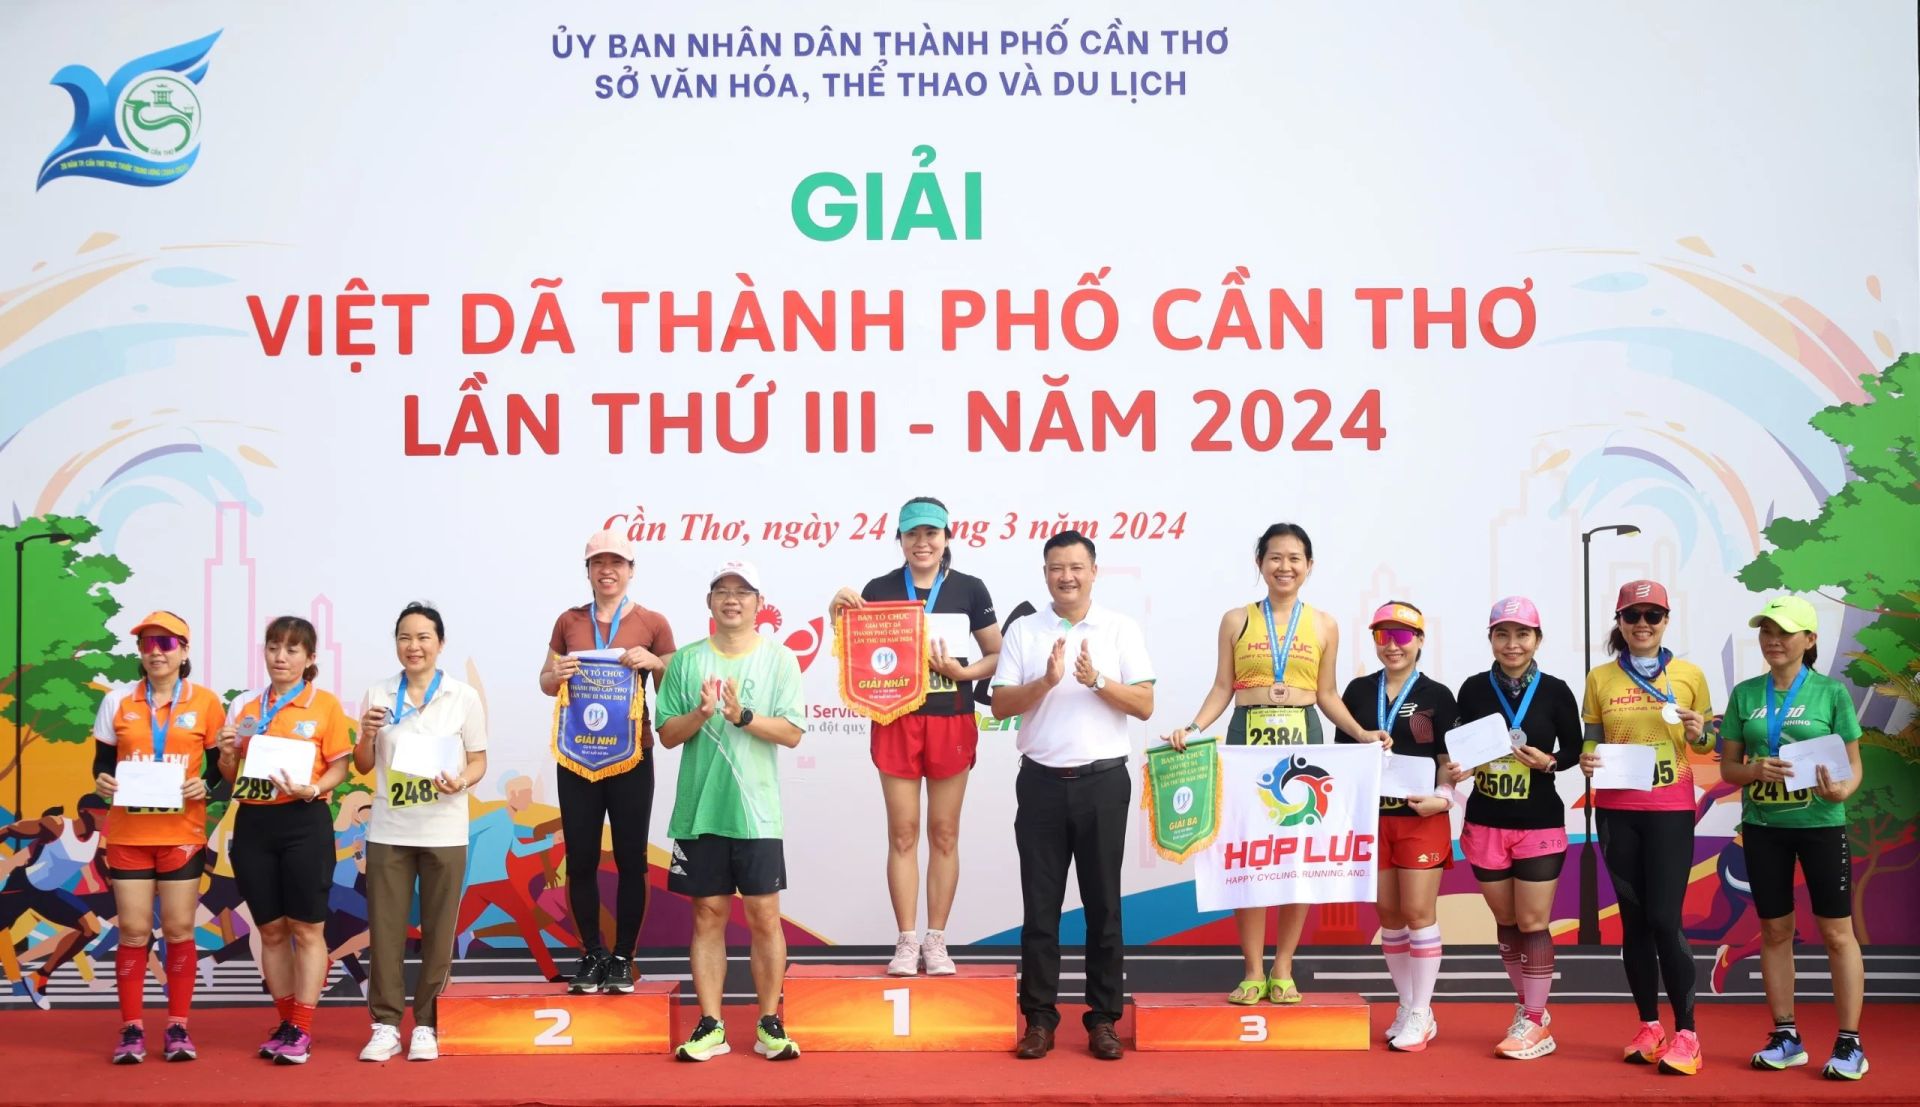 Mr Nguyen Ngoc Long - Deputy Director in charge of Can Tho National Sports Training Centre and Mr Nguyen Khanh Tung - Director of Can Tho City Institute of Social Sciences awarded the women’s 5km race for ages 41 and over